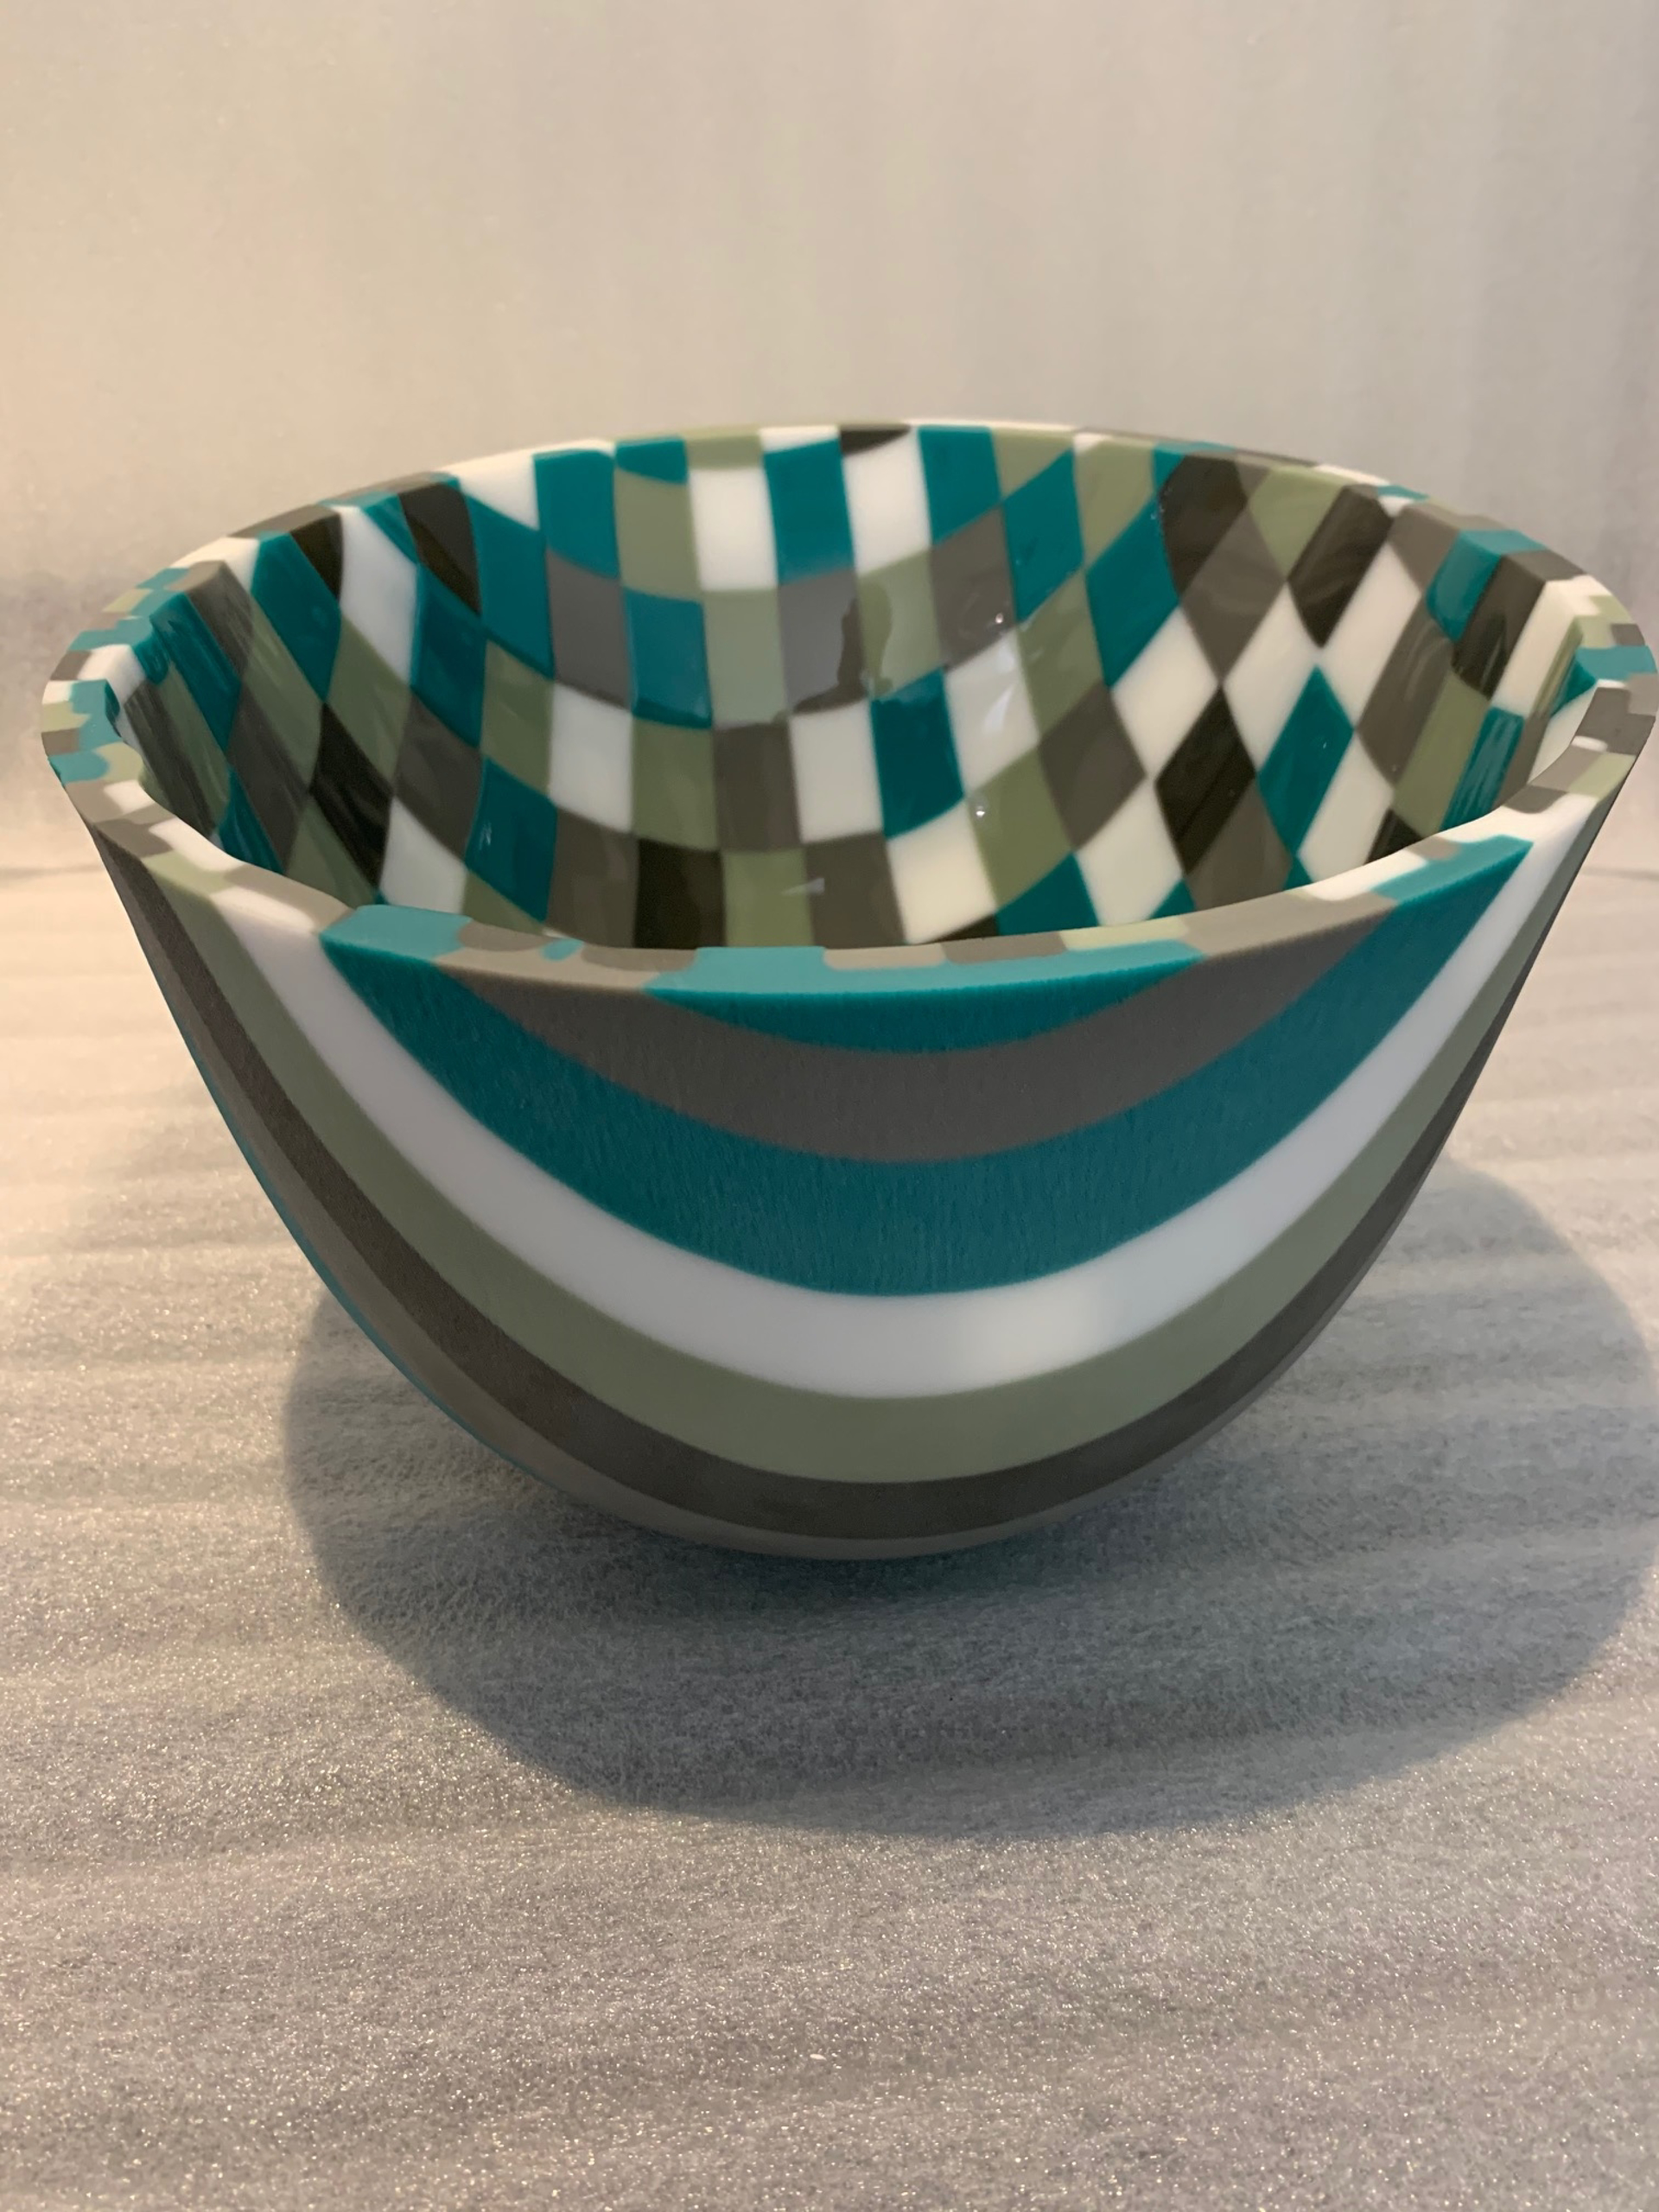 Quilt Bowl by Marcie Tauber